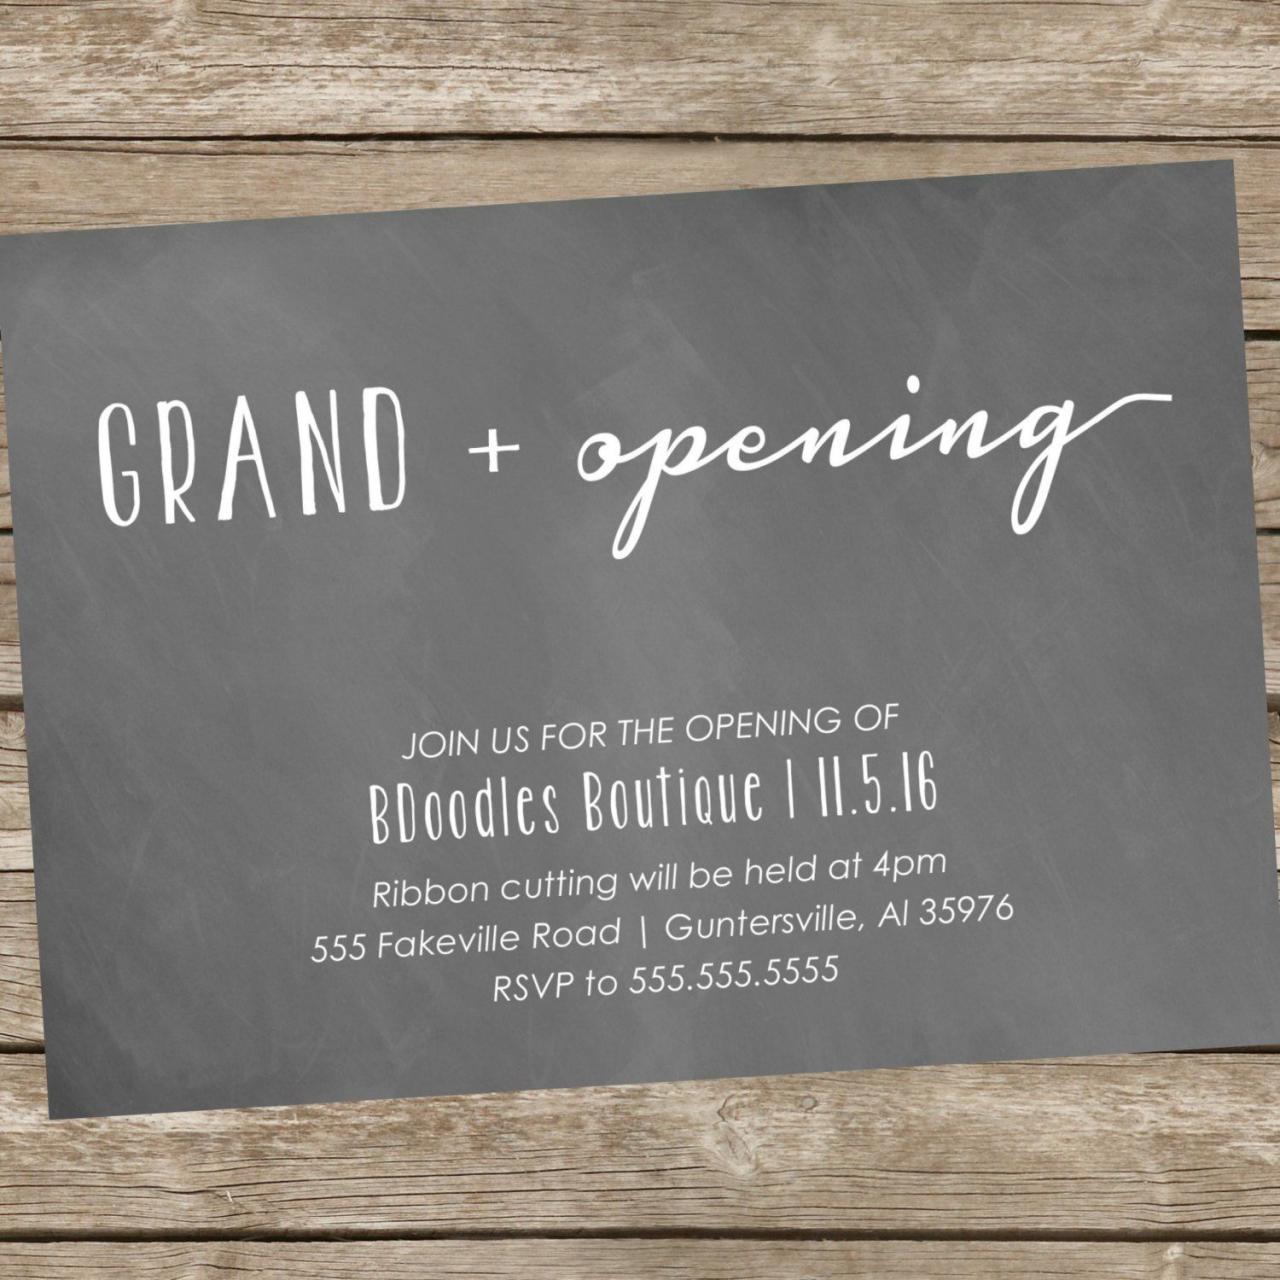 Printable Grand Opening or Open House Invitations | Etsy in 2020 | Open house invitation, Grand